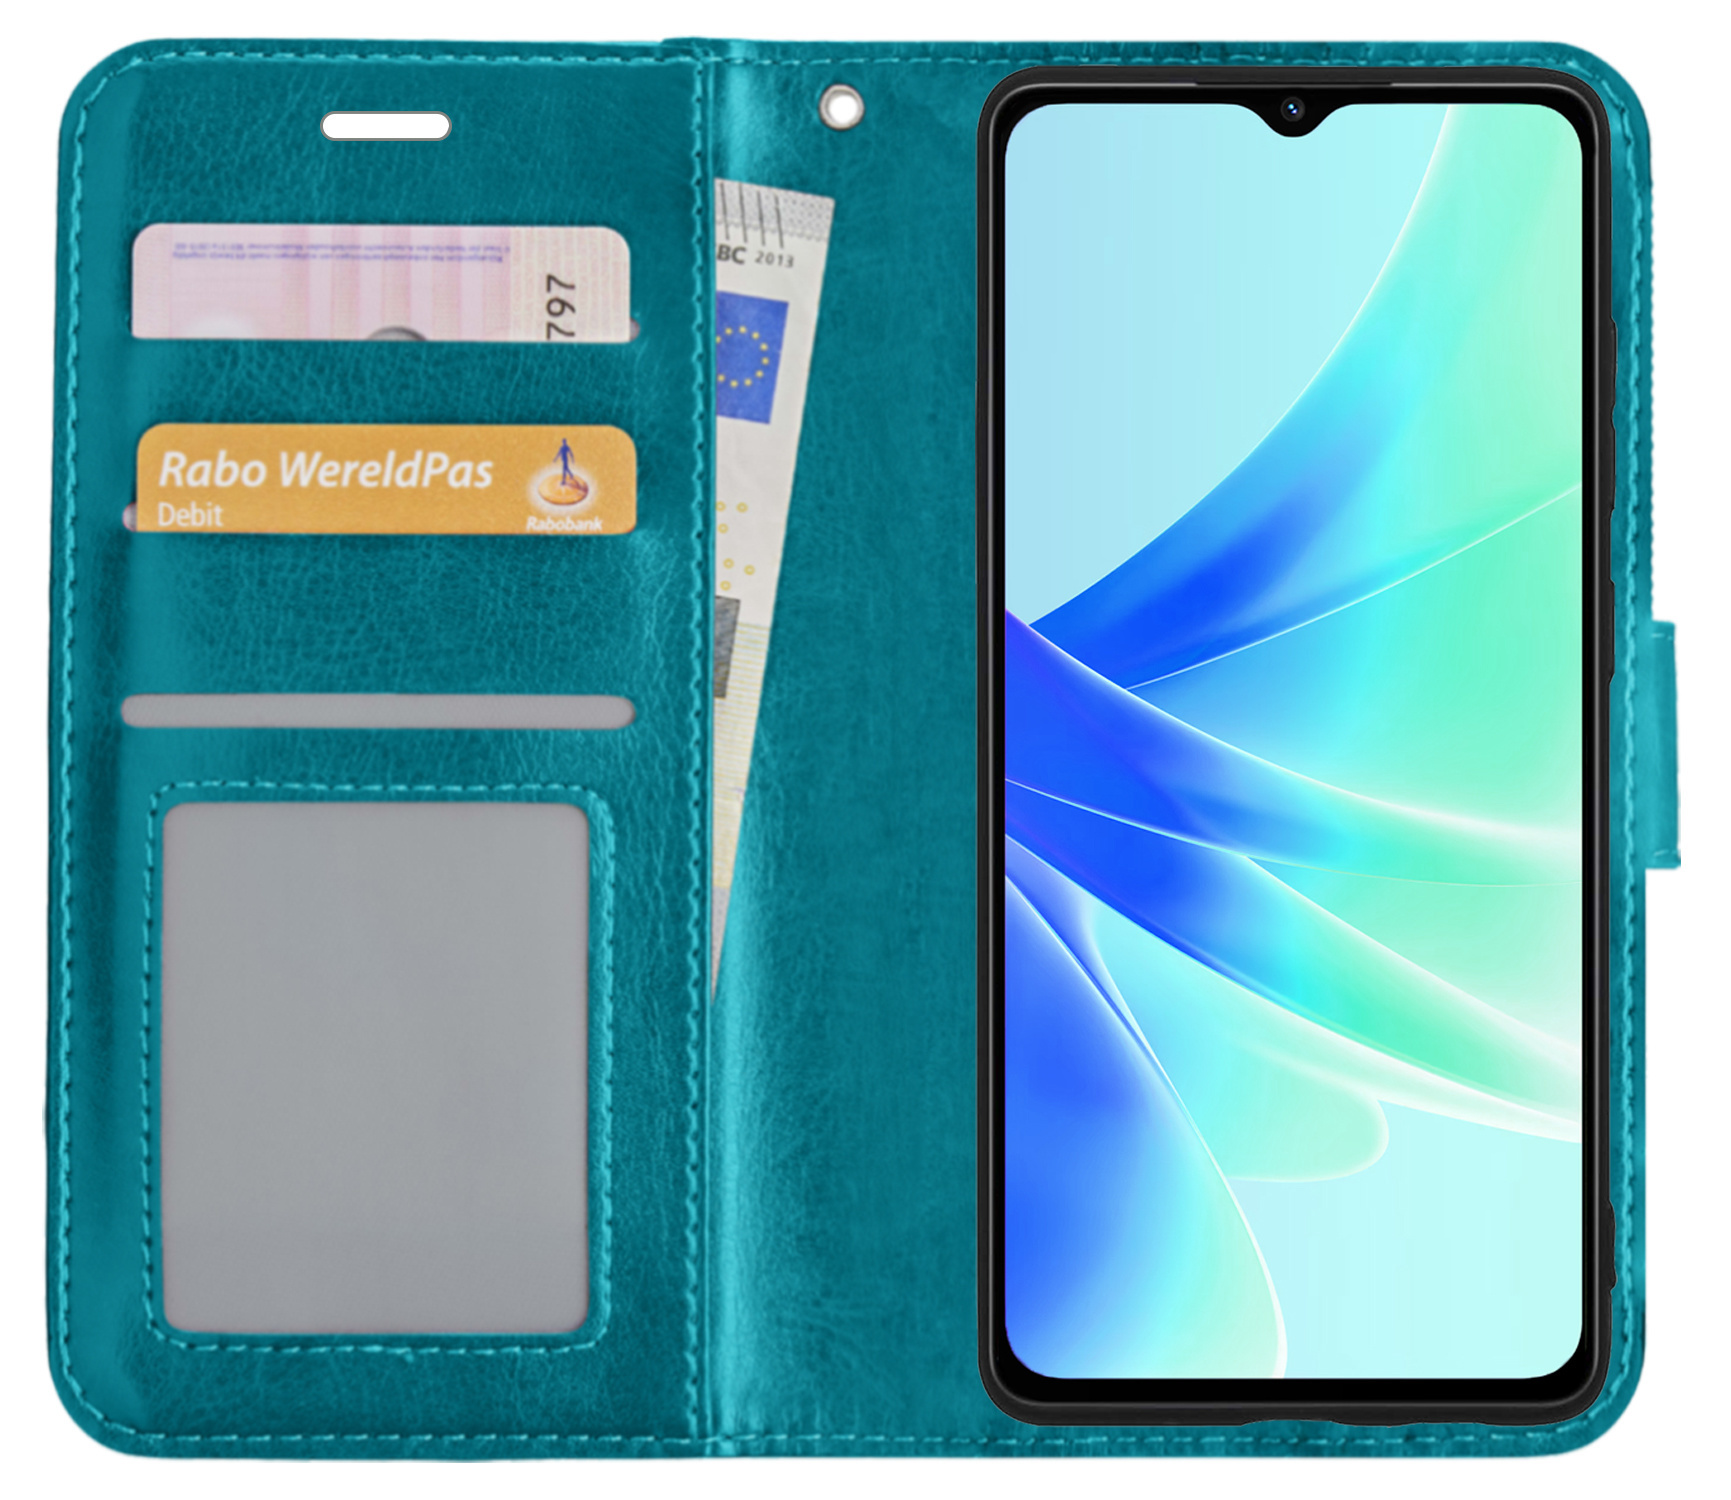 OPPO A17 Hoesje Bookcase Hoes Flip Case Book Cover Met Screenprotector - OPPO A17 Hoes Book Case Hoesje - Turquoise